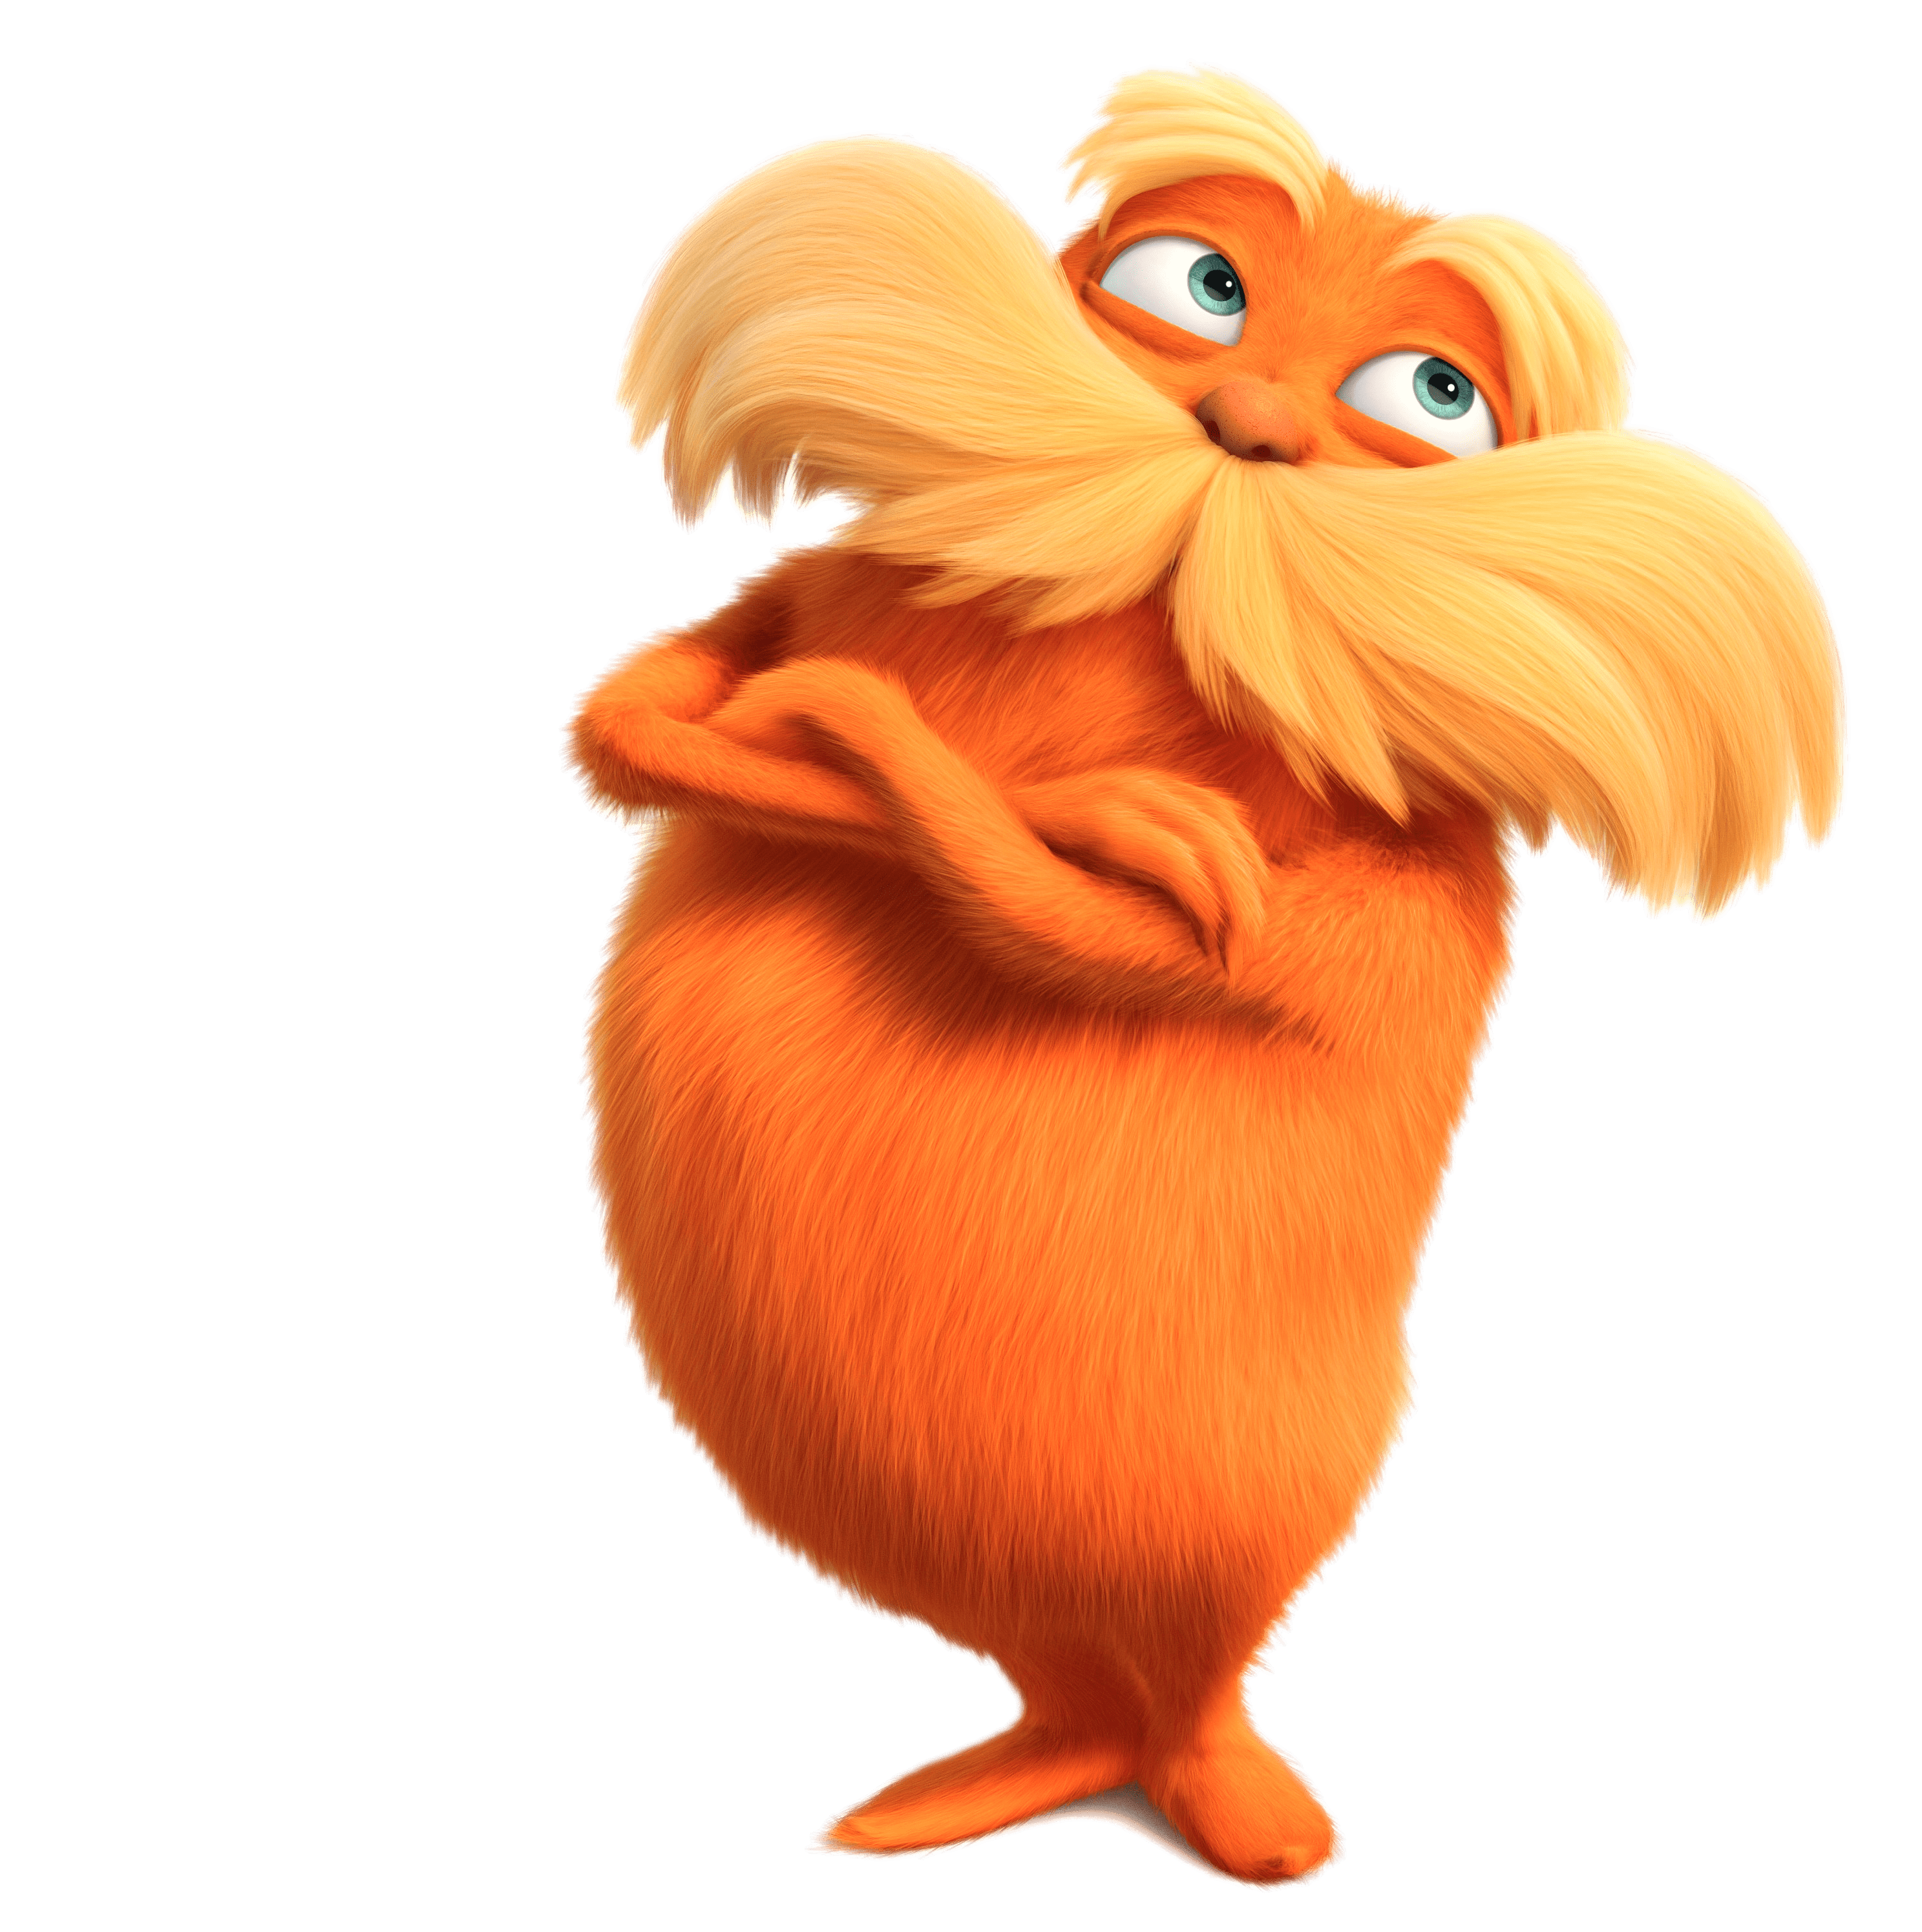 The thinking transparent png. Face clipart lorax